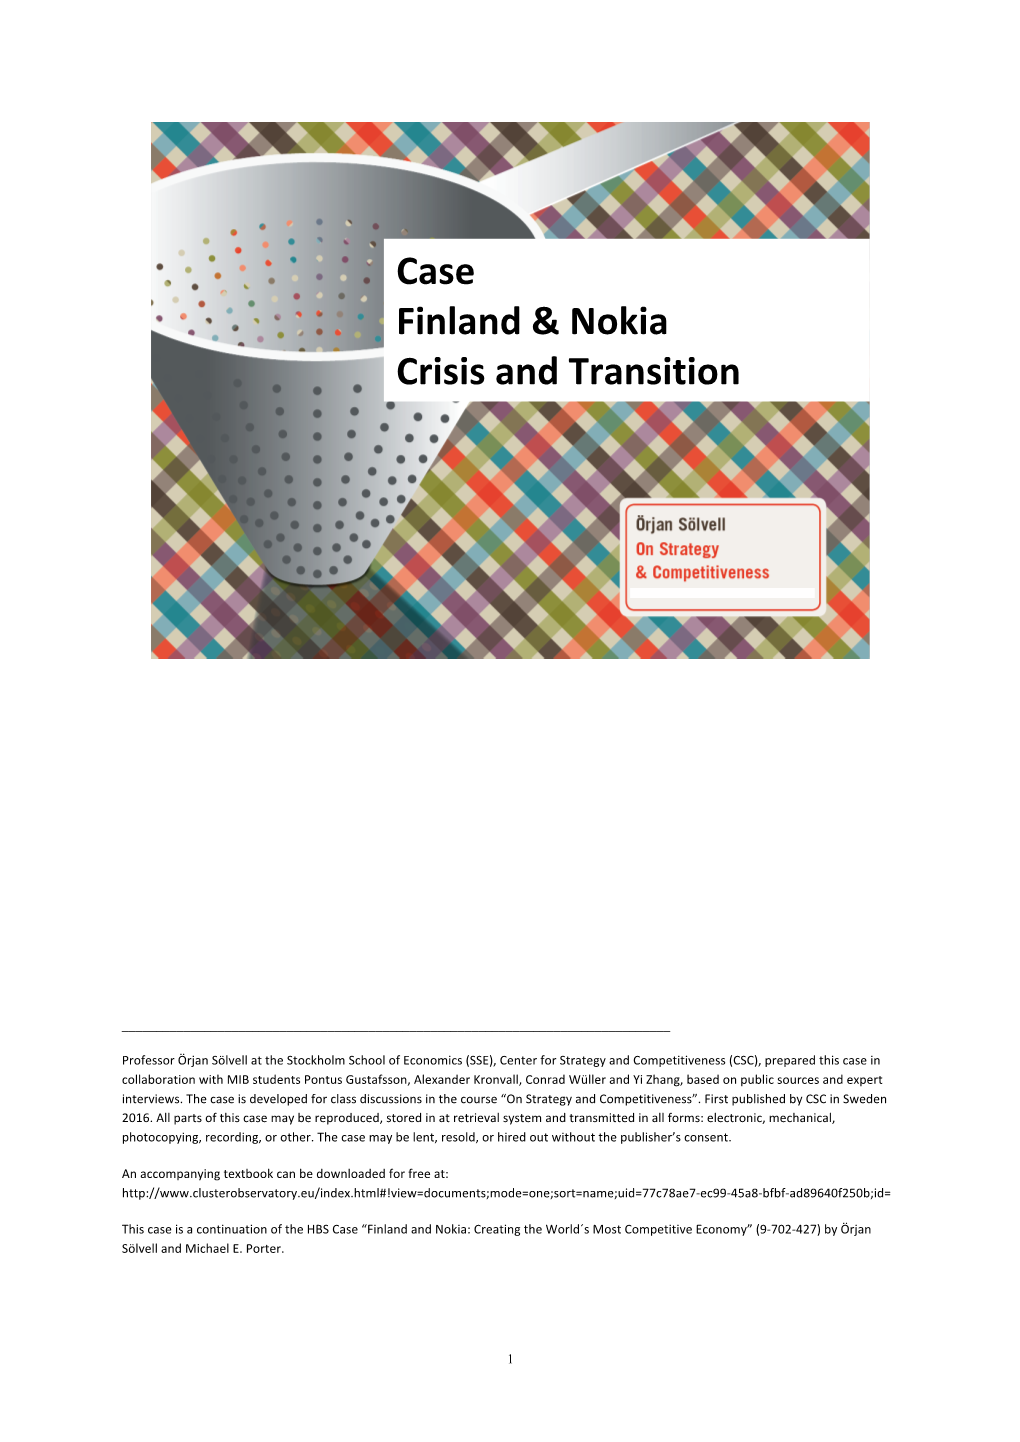 Case Finland & Nokia Crisis and Transition